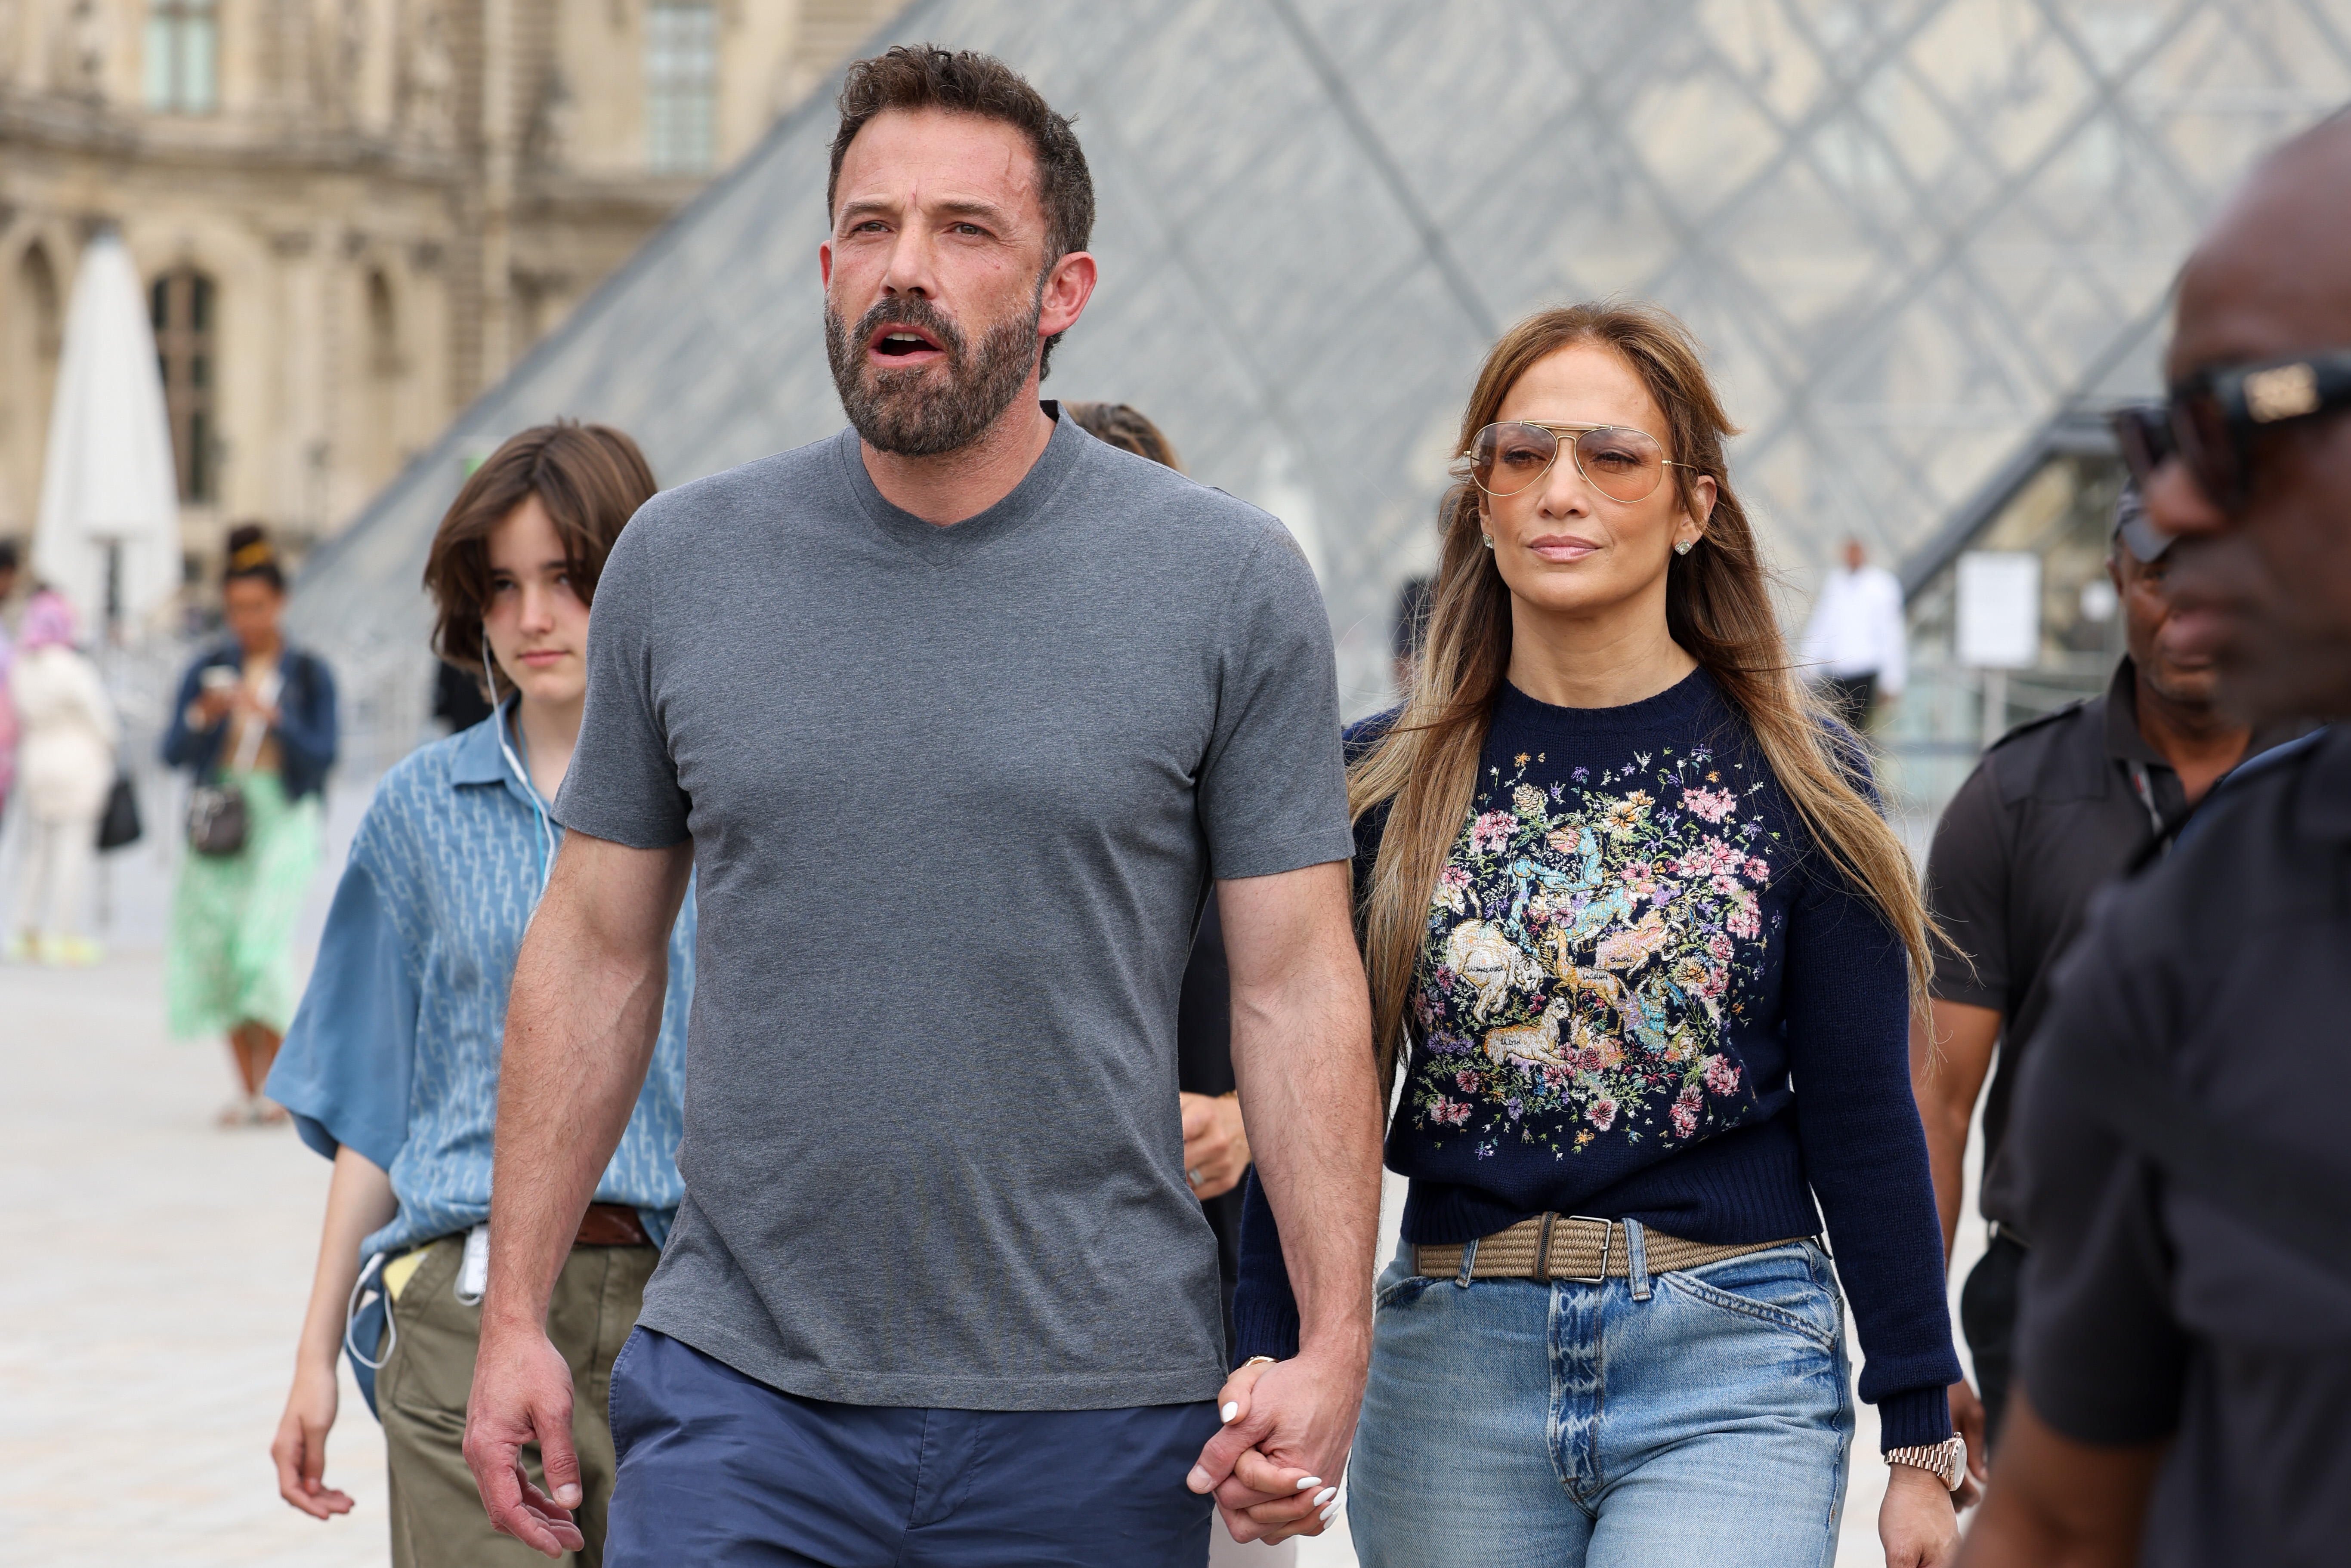 Ben Affleck and Jennifer Lopez are seen at the Louvre Museum in Paris, France, on July 26, 2022. | Source: Getty Images